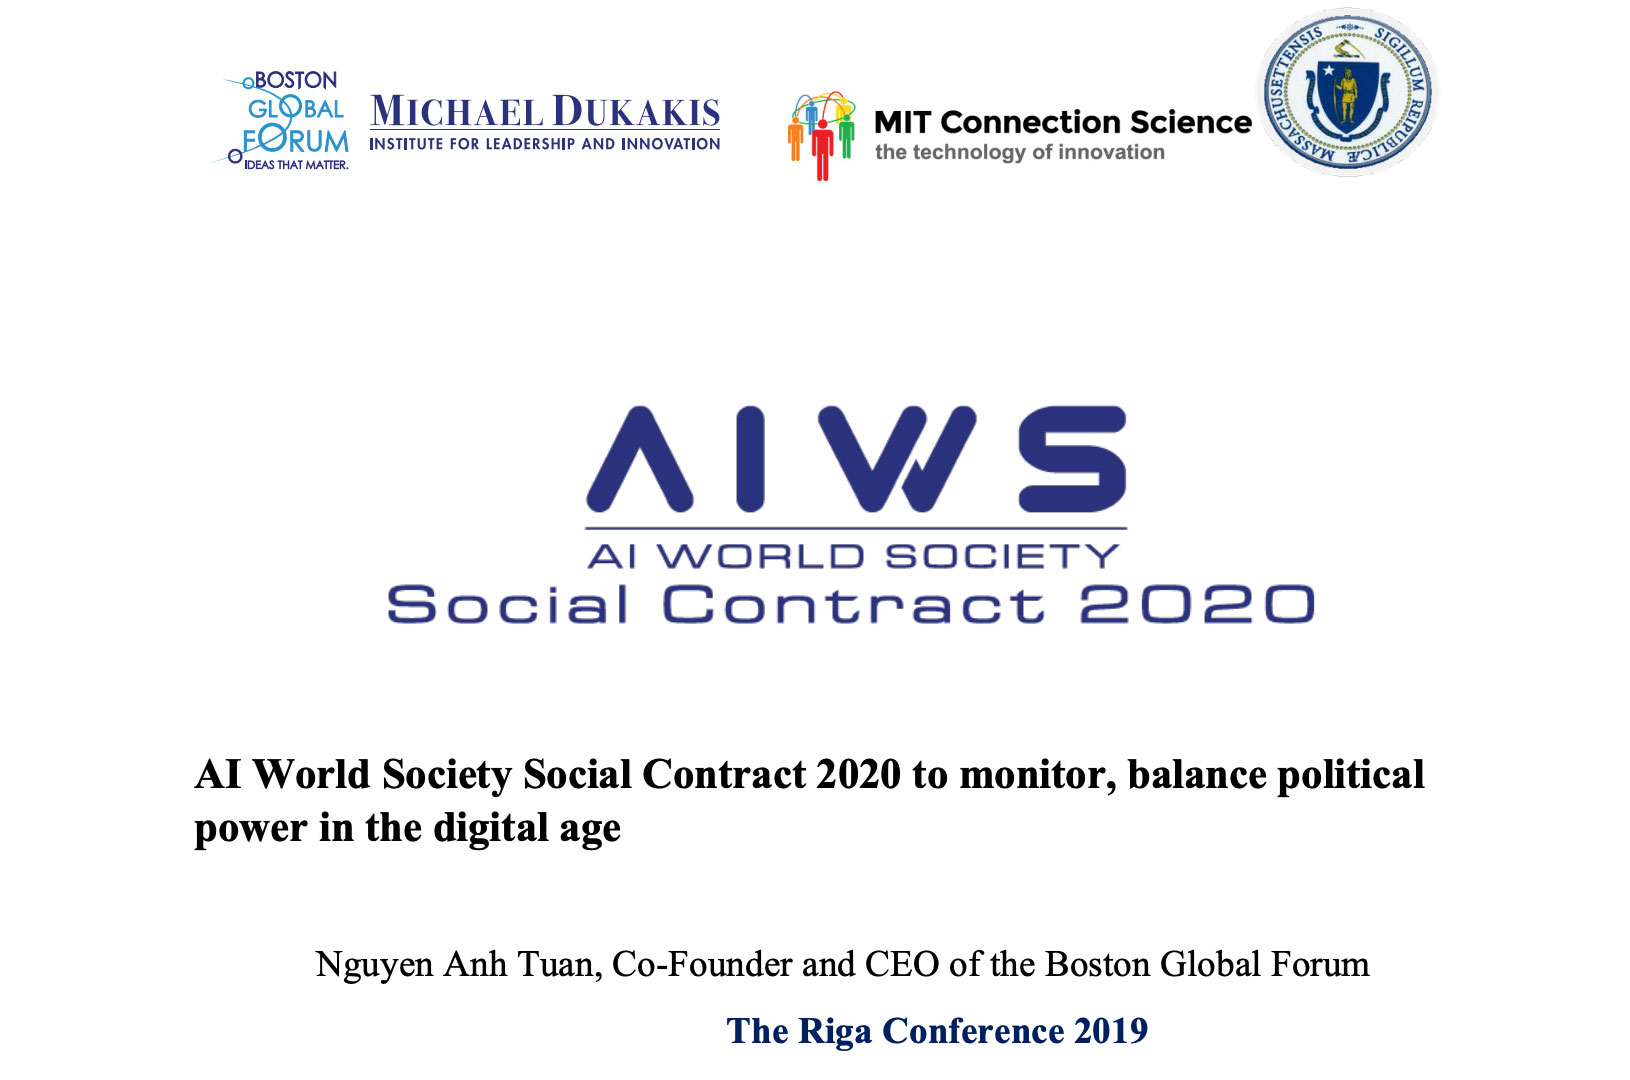 AI World Society Social Contract 2020 to monitor, balance political power in the digital age